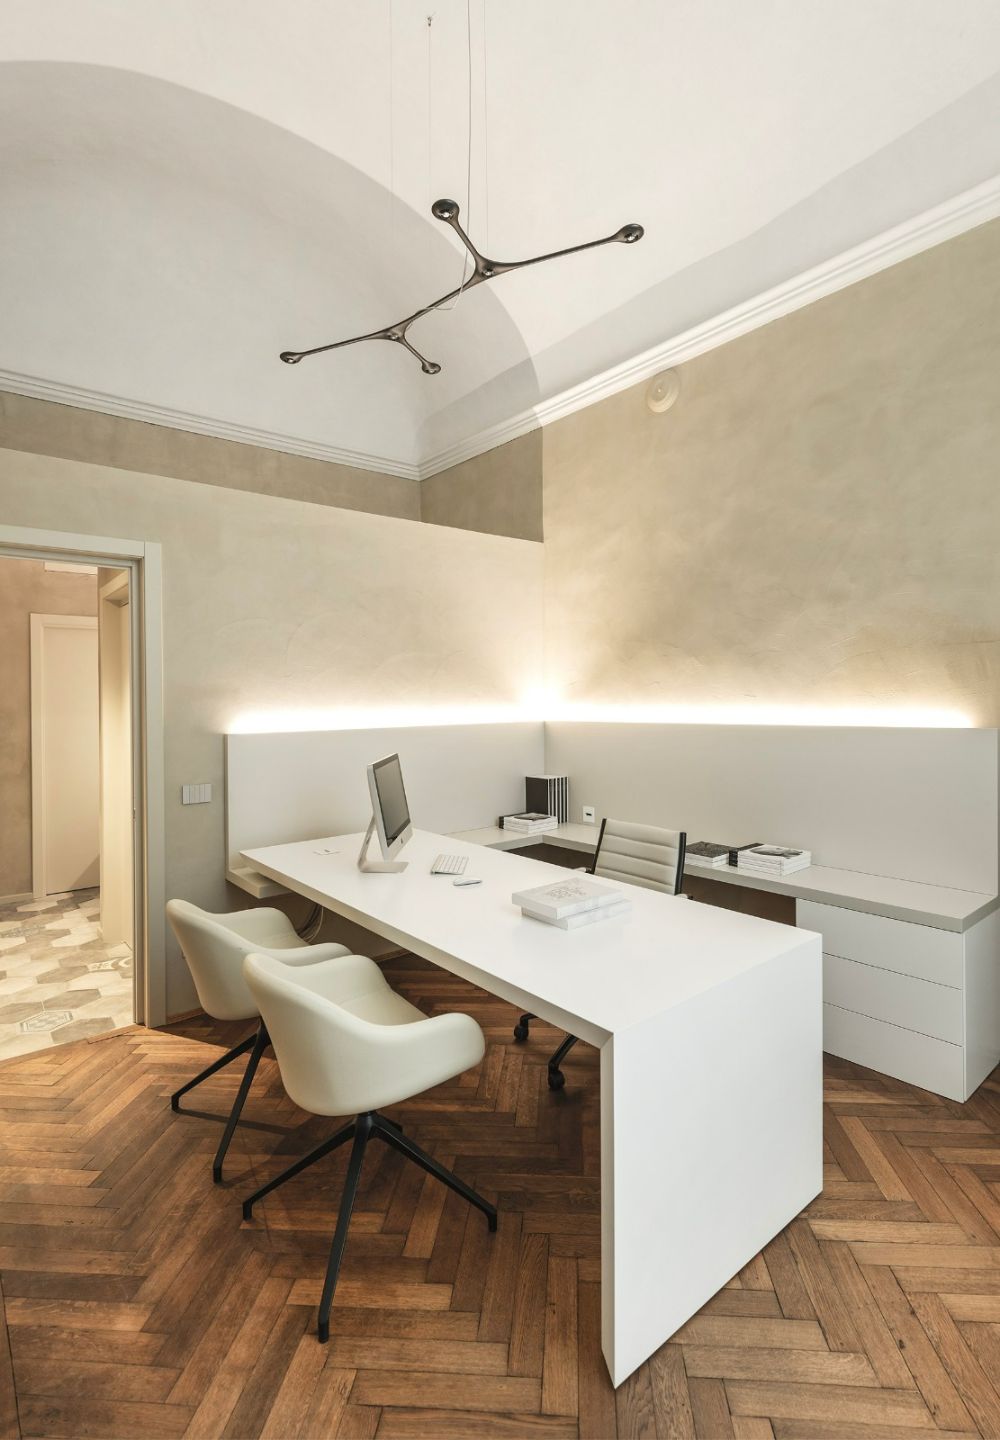 Office In Piacenza Italy Featuring Carbon Light By Tokio Project Designers Guglielmetti Interior 7, Design Authority